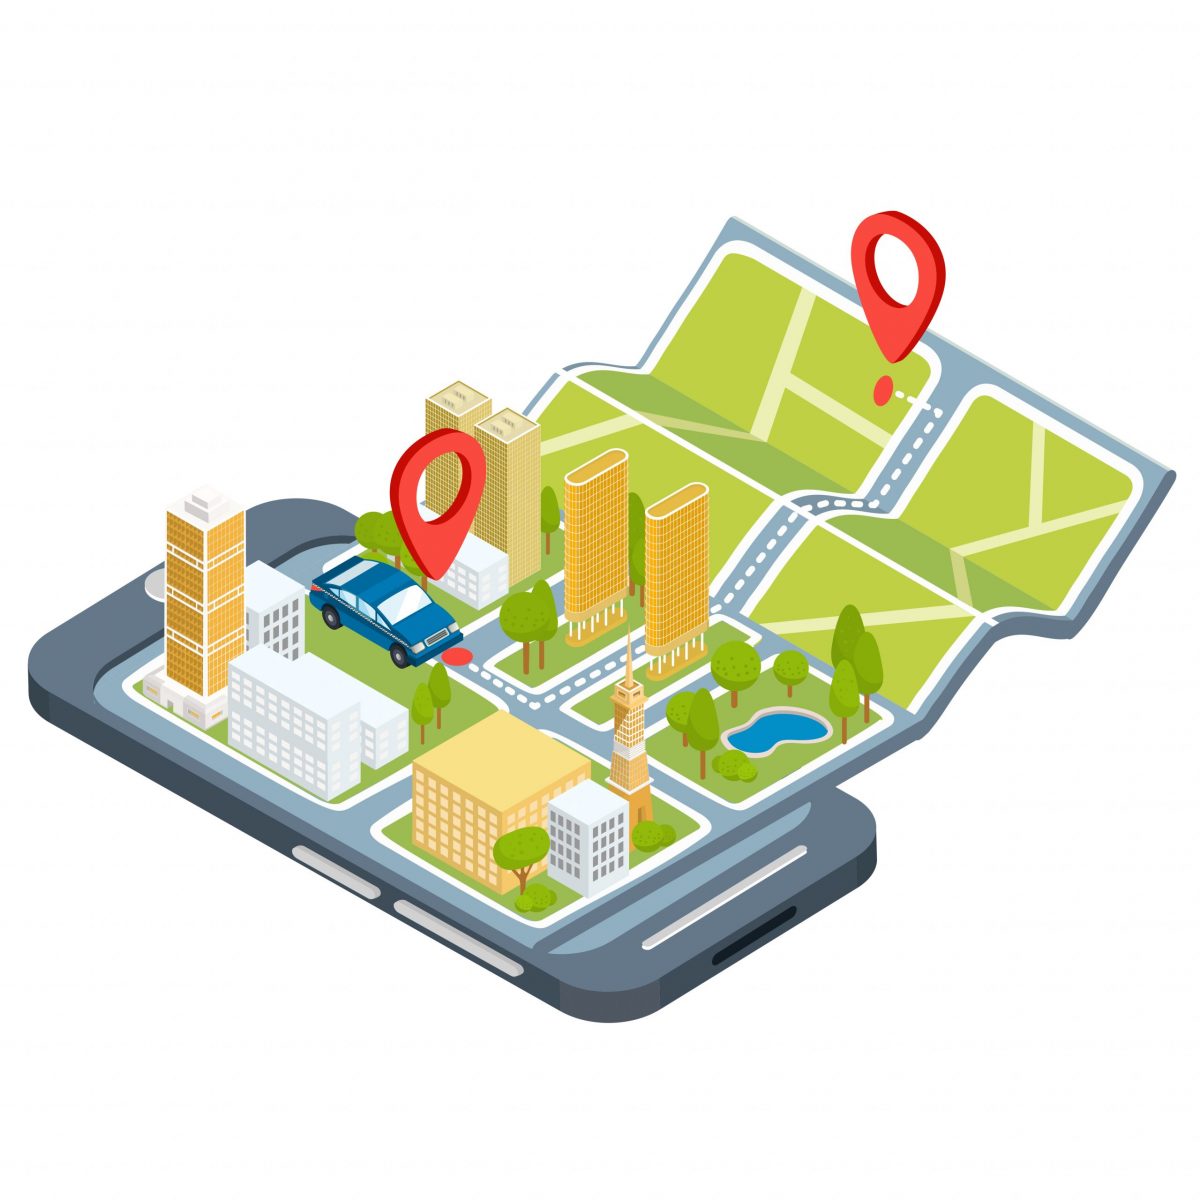 Vector illustration of the concept using the mobile application of the global positioning system. Image of a smartphone with a paper map unfolded from it with location symbols, 3D houses, cars, trees